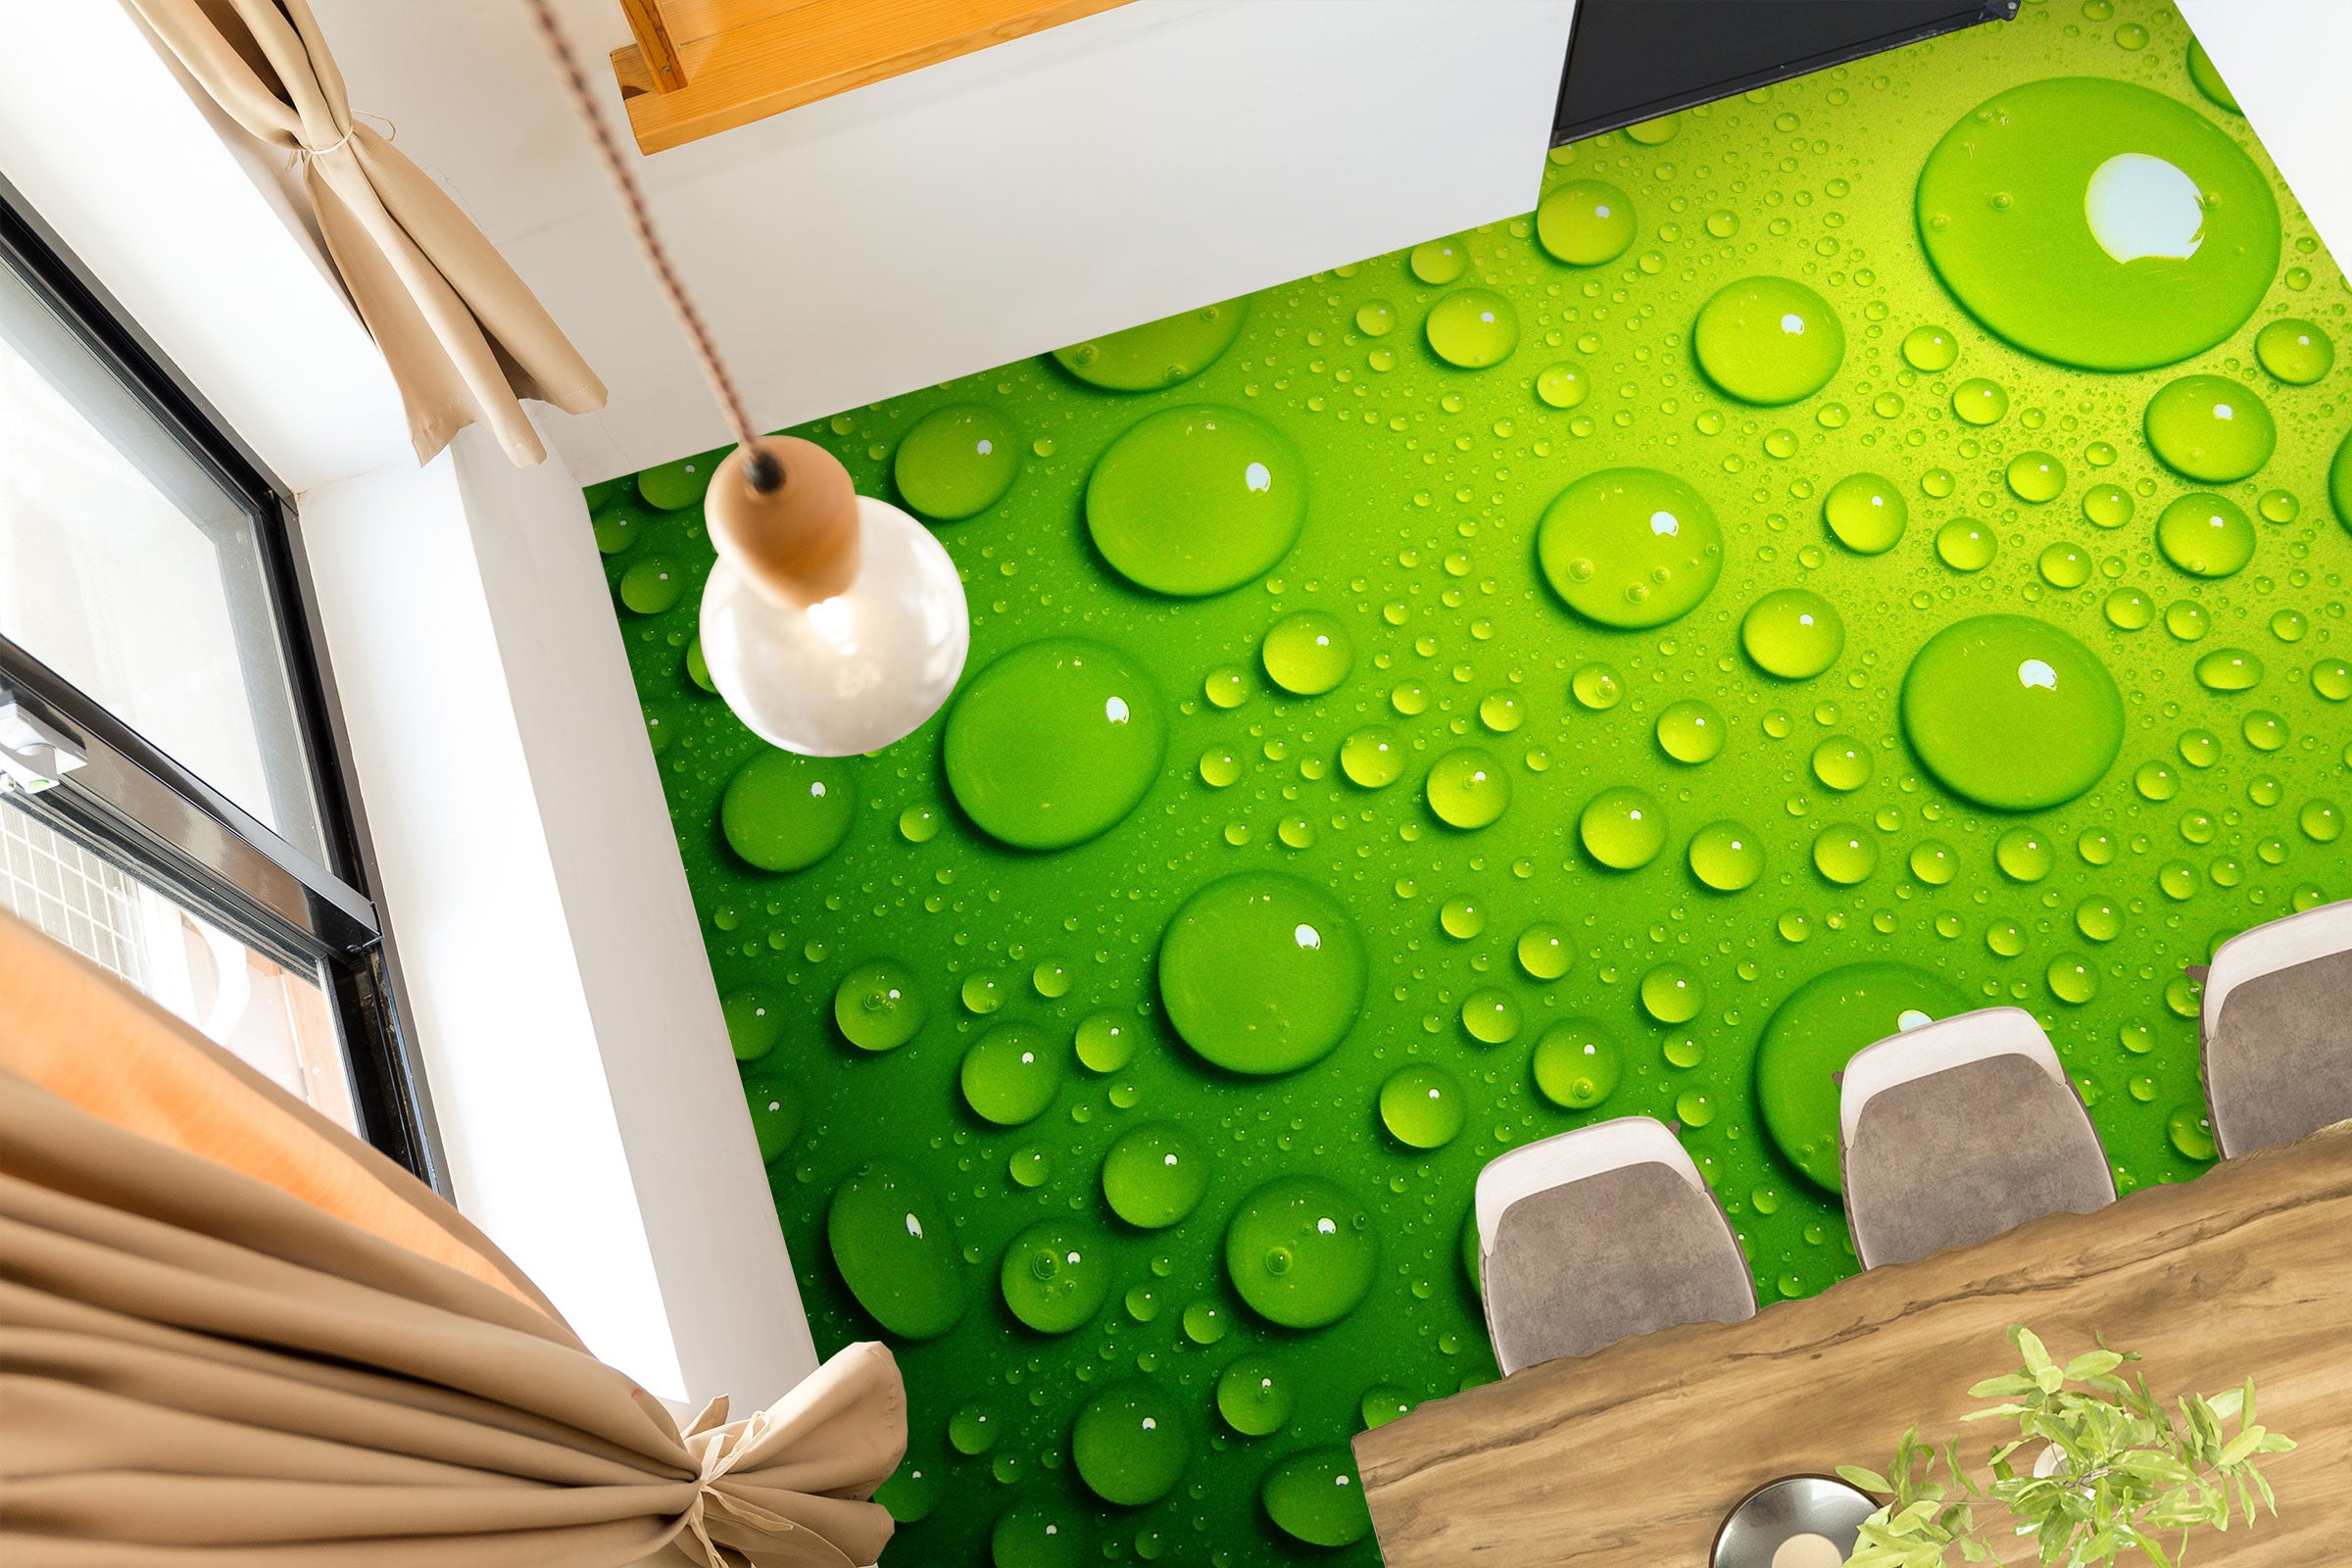 3D Fresh Green And Water Drops 1374 Floor Mural  Wallpaper Murals Self-Adhesive Removable Print Epoxy